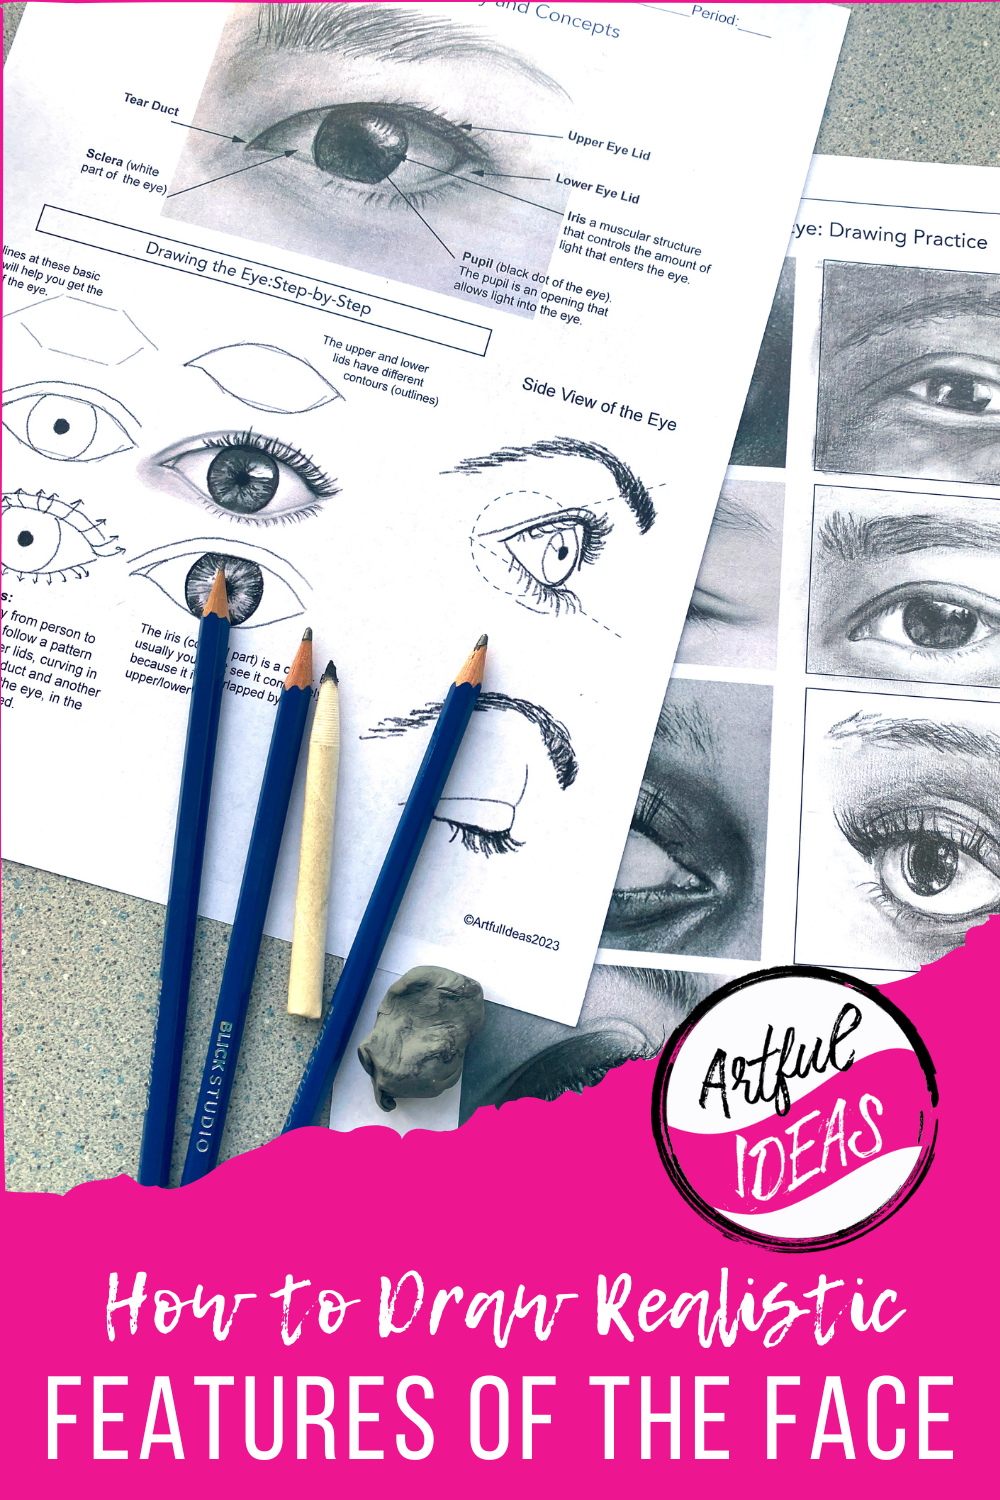 How to draw an eye step by step drawing worksheets and guide